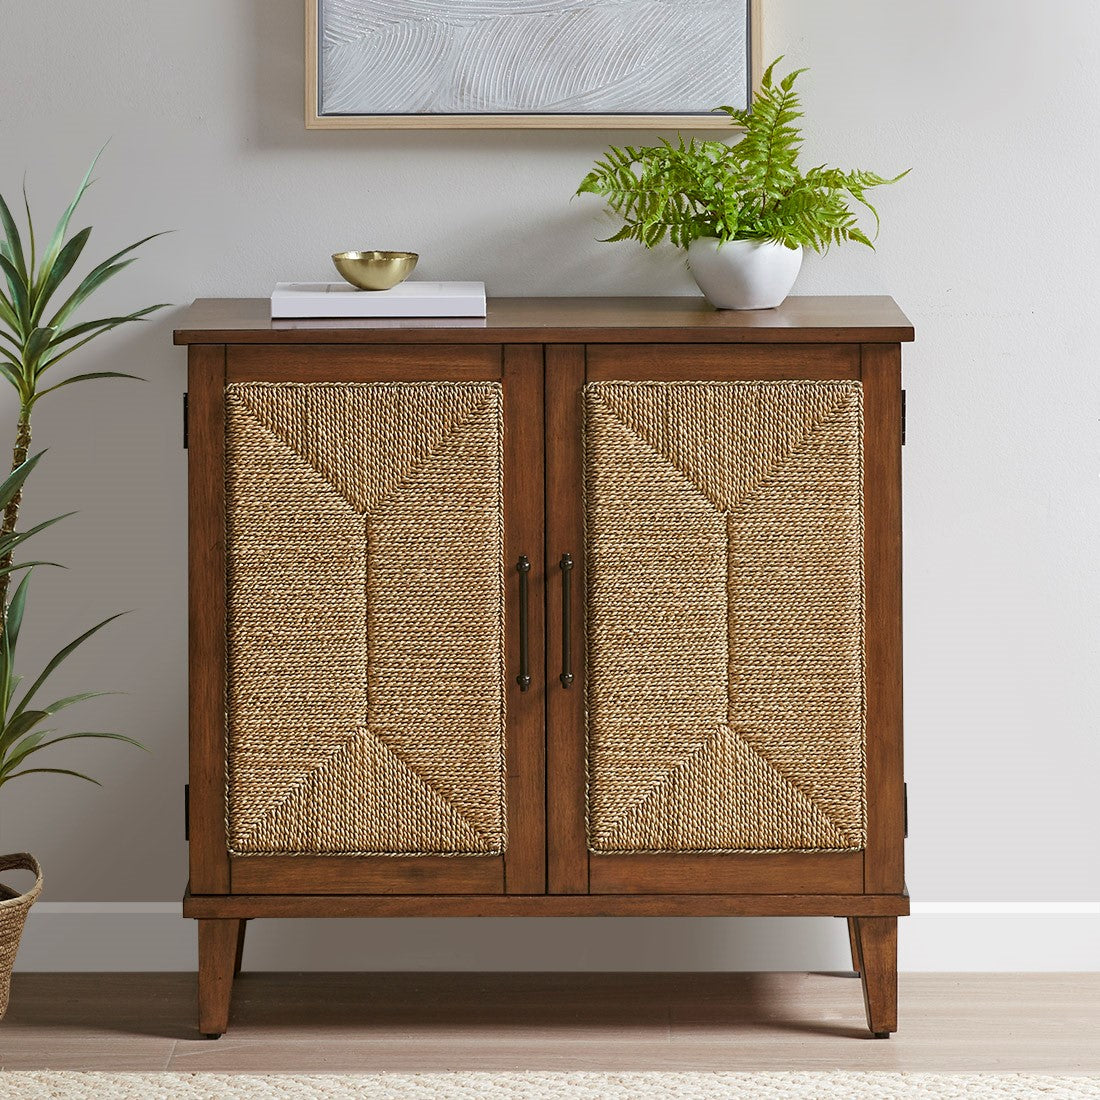 INK+IVY Seagate Handcrafted Seagrass 2-Door Accent chest - Natural  Shop Online & Save - ExpressHomeDirect.com